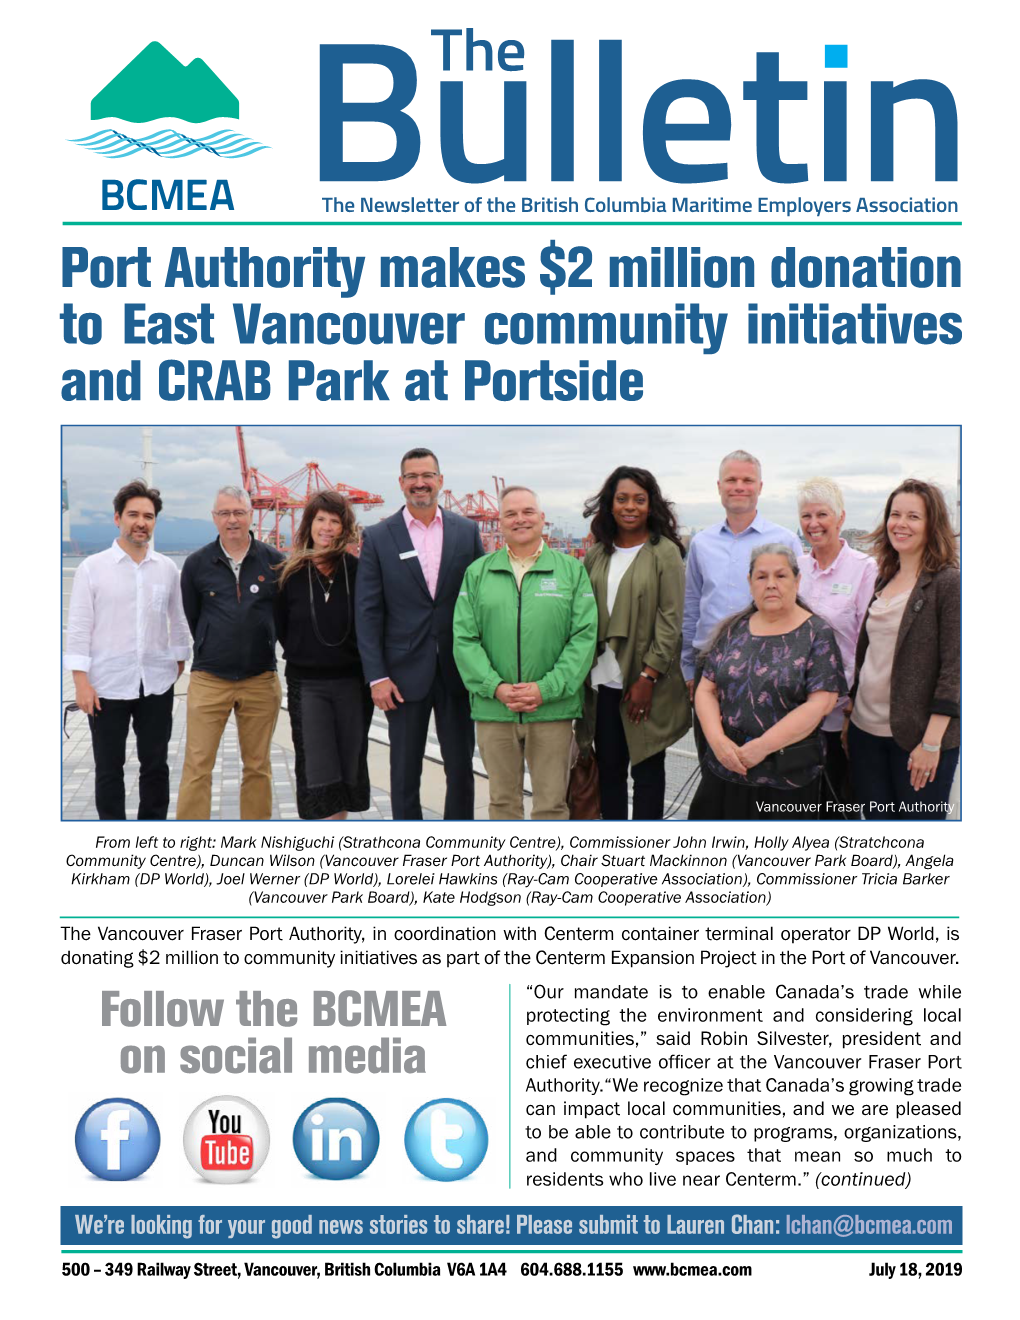 Port Authority Makes $2 Million Donation to East Vancouver Community Initiatives and CRAB Park at Portside